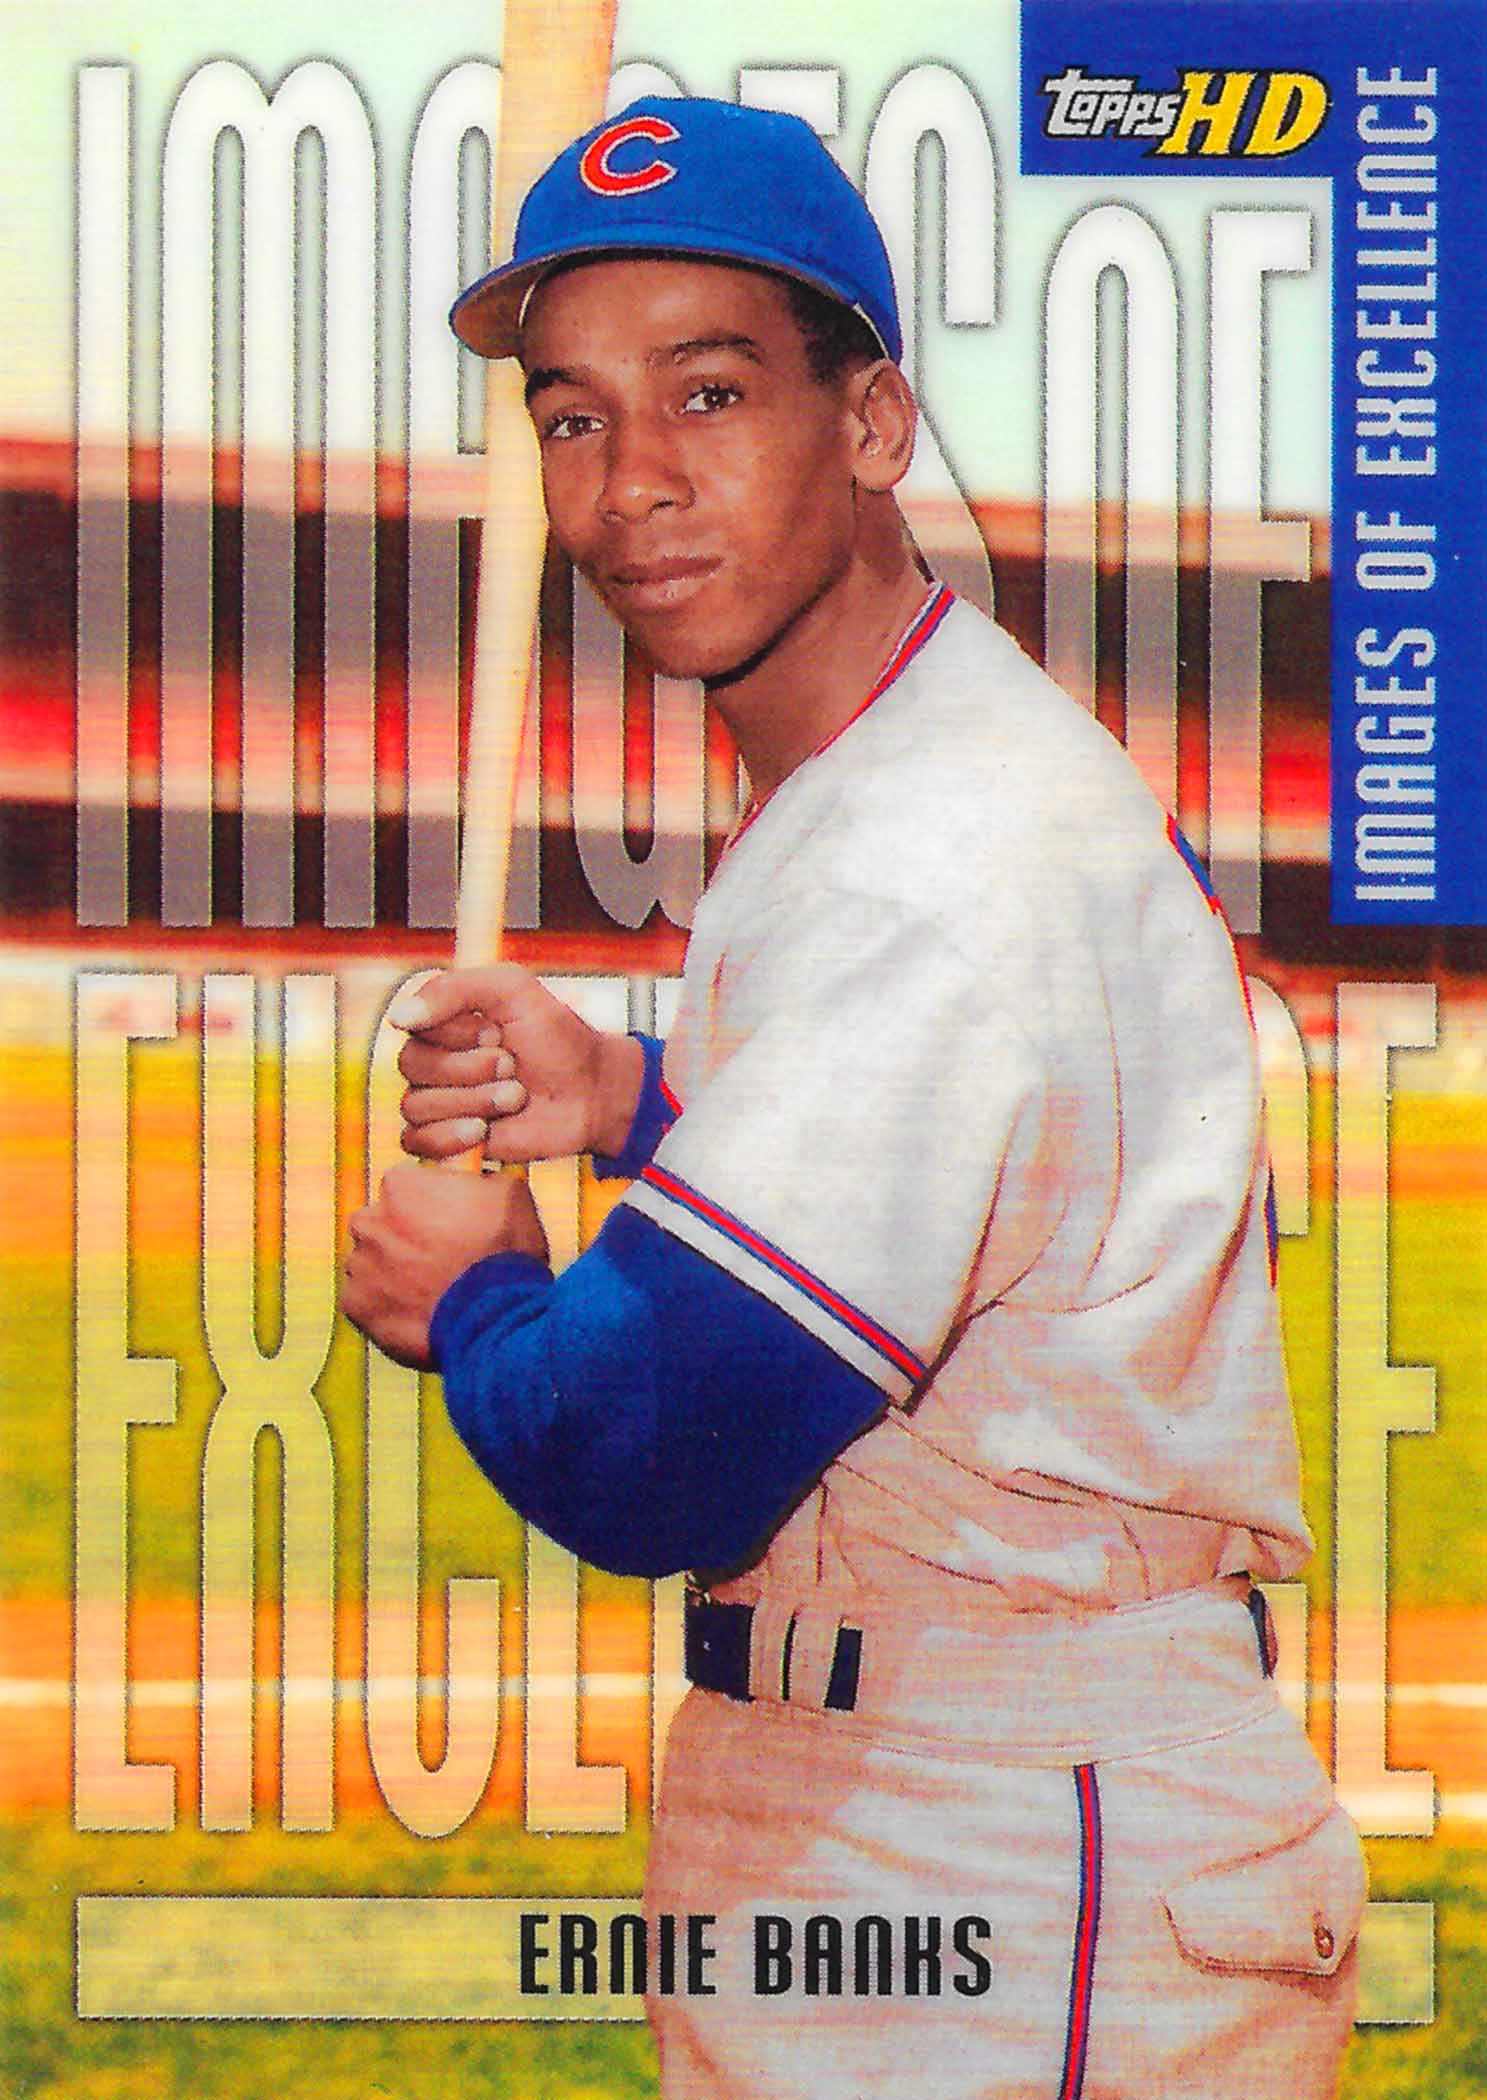 2001 Topps HD Images of Excellence